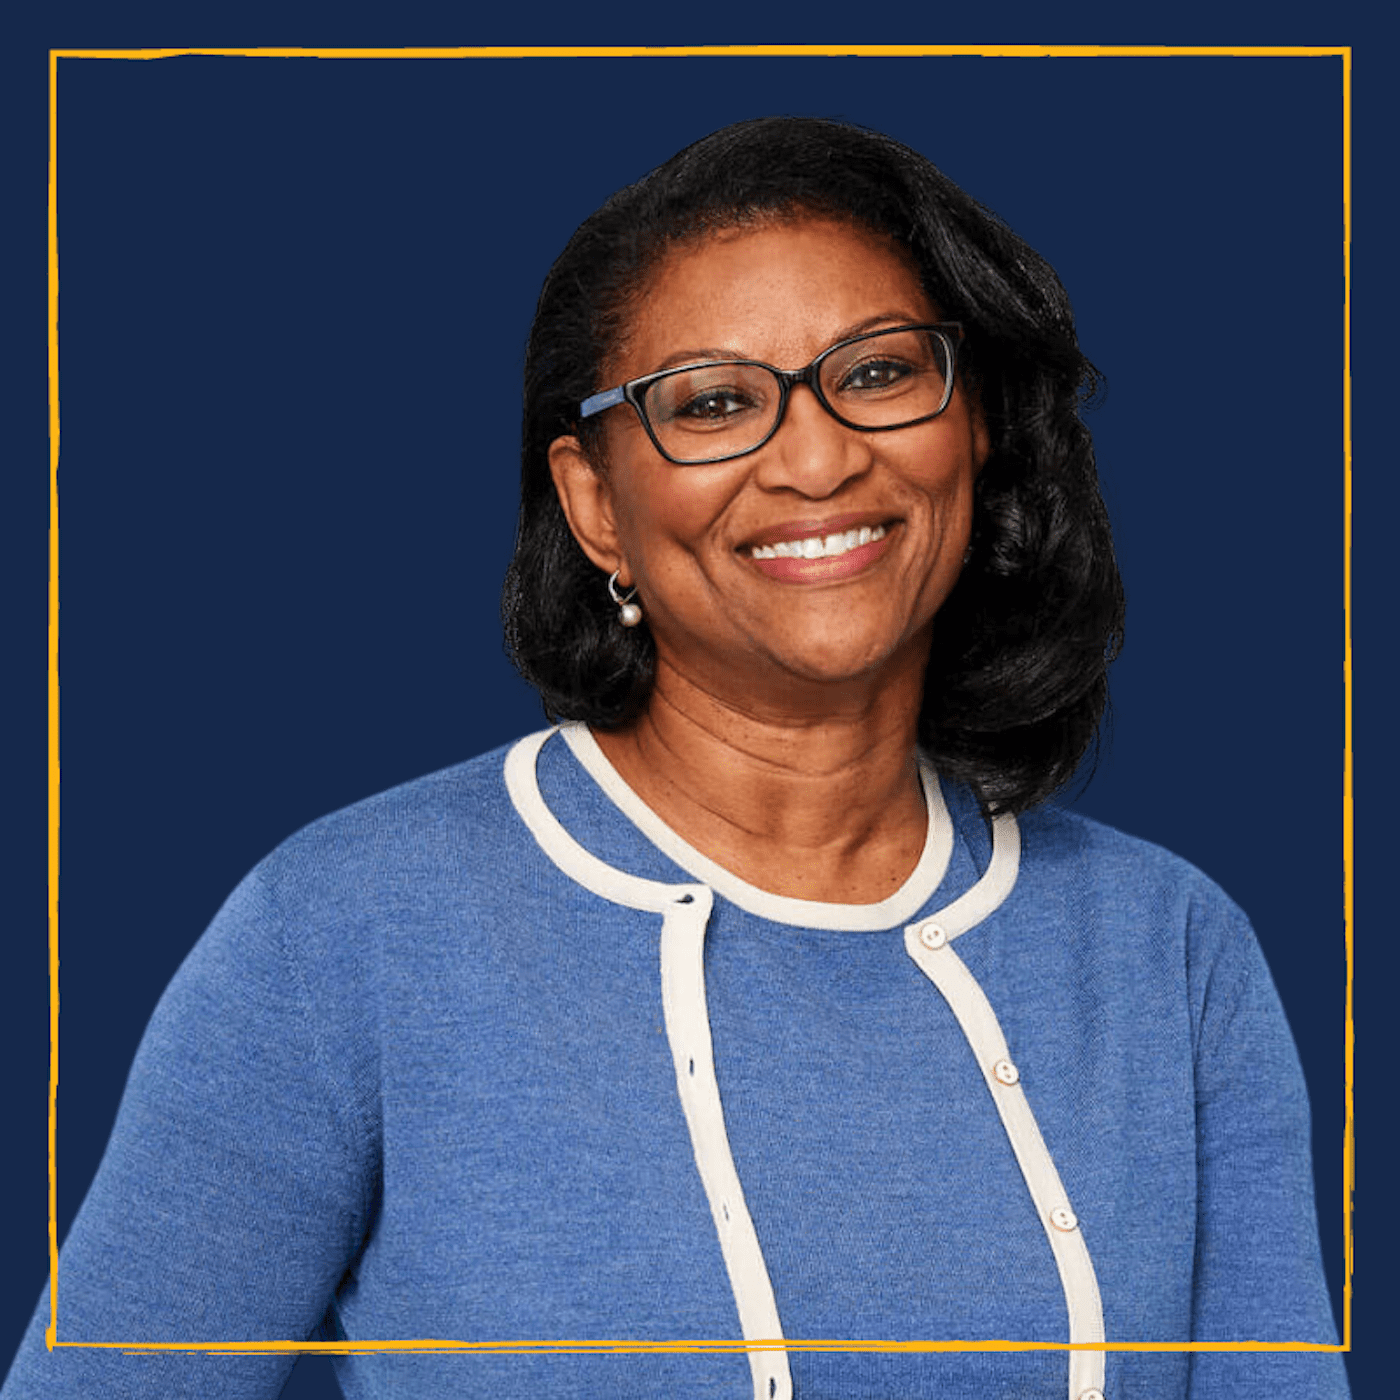 Photo of Panamanian- American Alumna. Brown Skin, Dark hair, smiling, wearing glasses and a blue and white top against Berkeley Blue background.